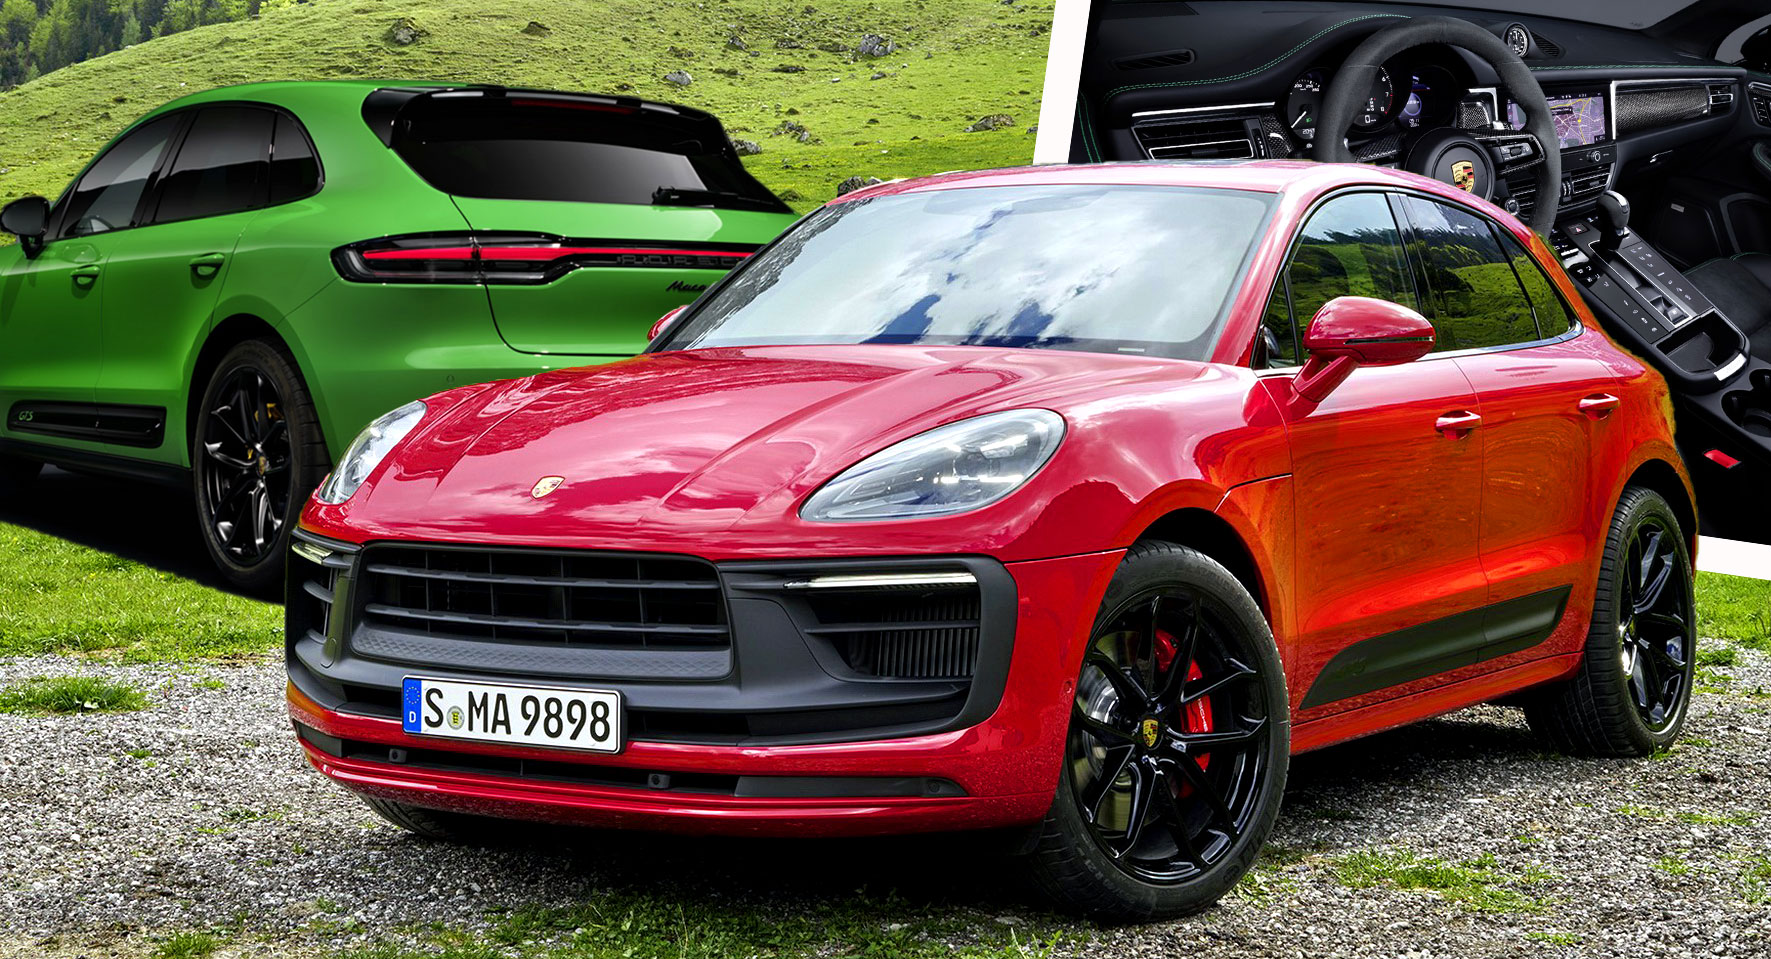 2022 Porsche Macan Facelift Brings A Power Boost To Base, S And GTS Models | Carscoops